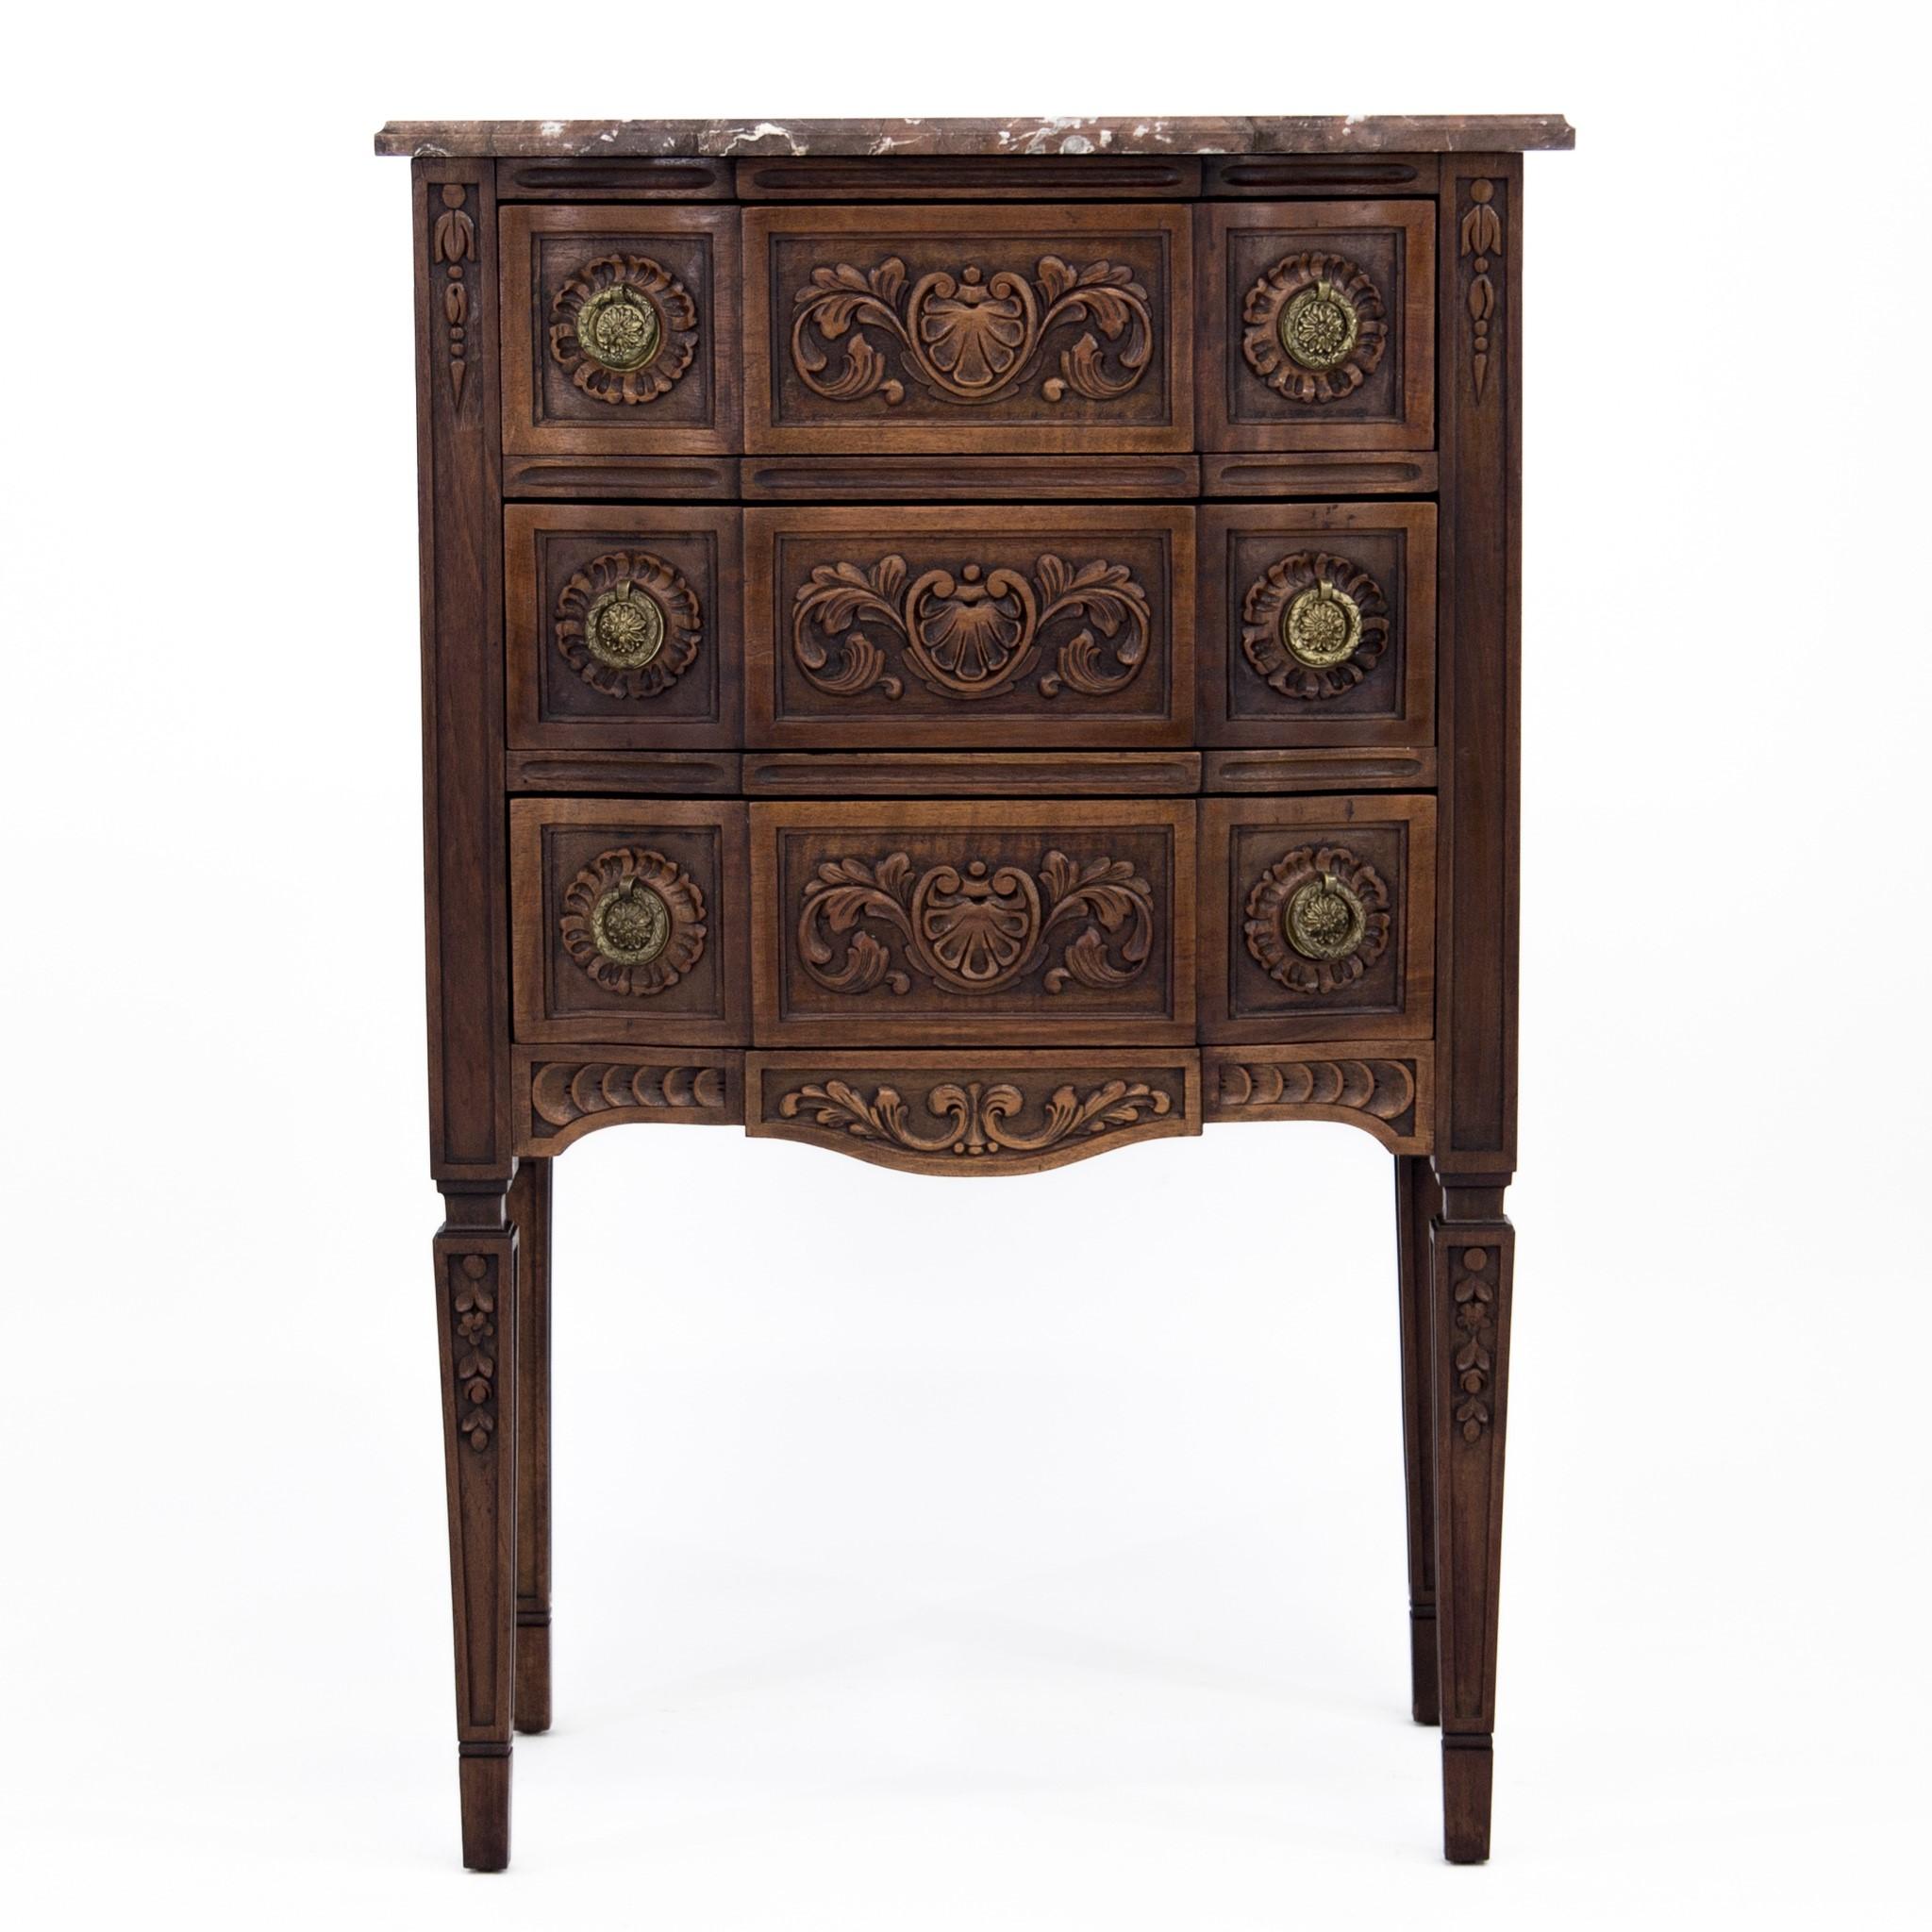 Late 19th century carved Louis XVI style three-drawer commode, bedside table, nightstand or side table with shaped marble top and Empire style brass ring pulls, made in Belgium. The drawer fronts, apron and legs have intricate carved foliate design.